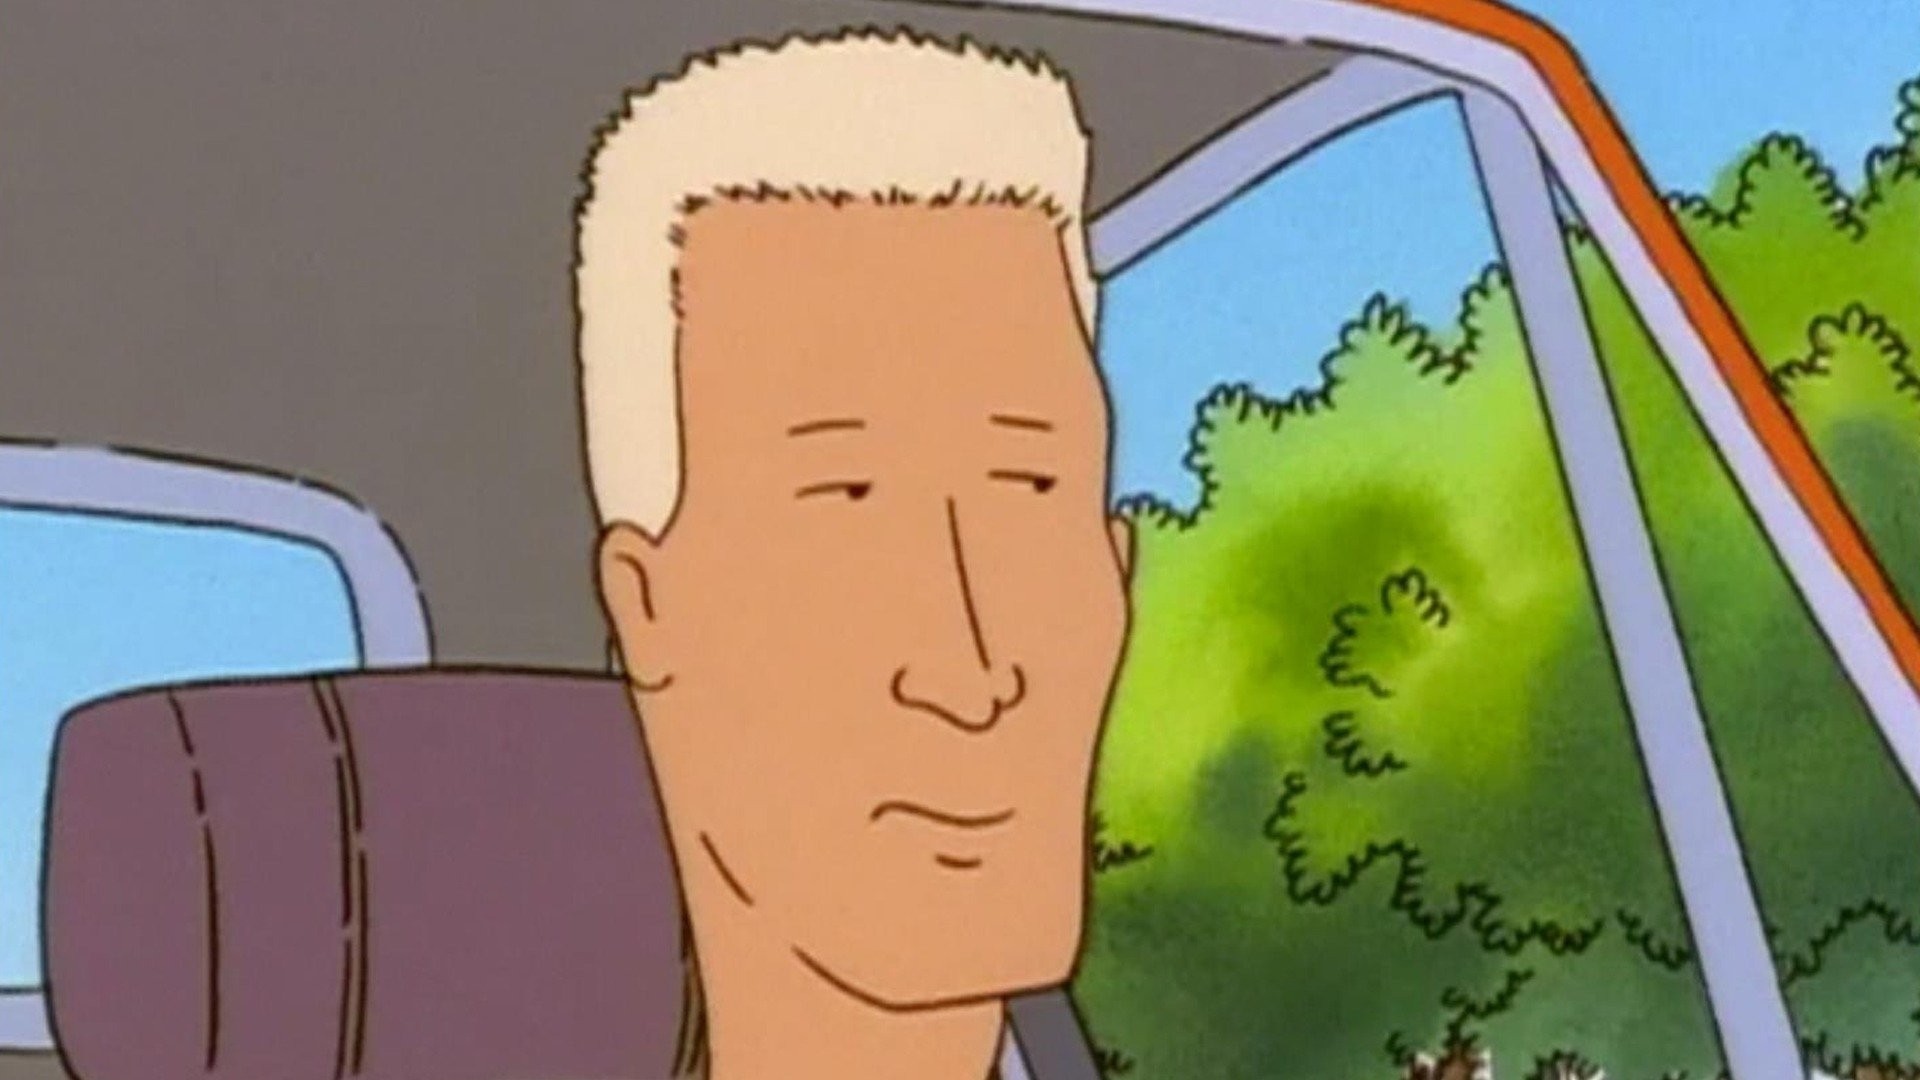 Mike Judge Explains How He Came Up With Boomhauer's Voice for 'King of the  Hill